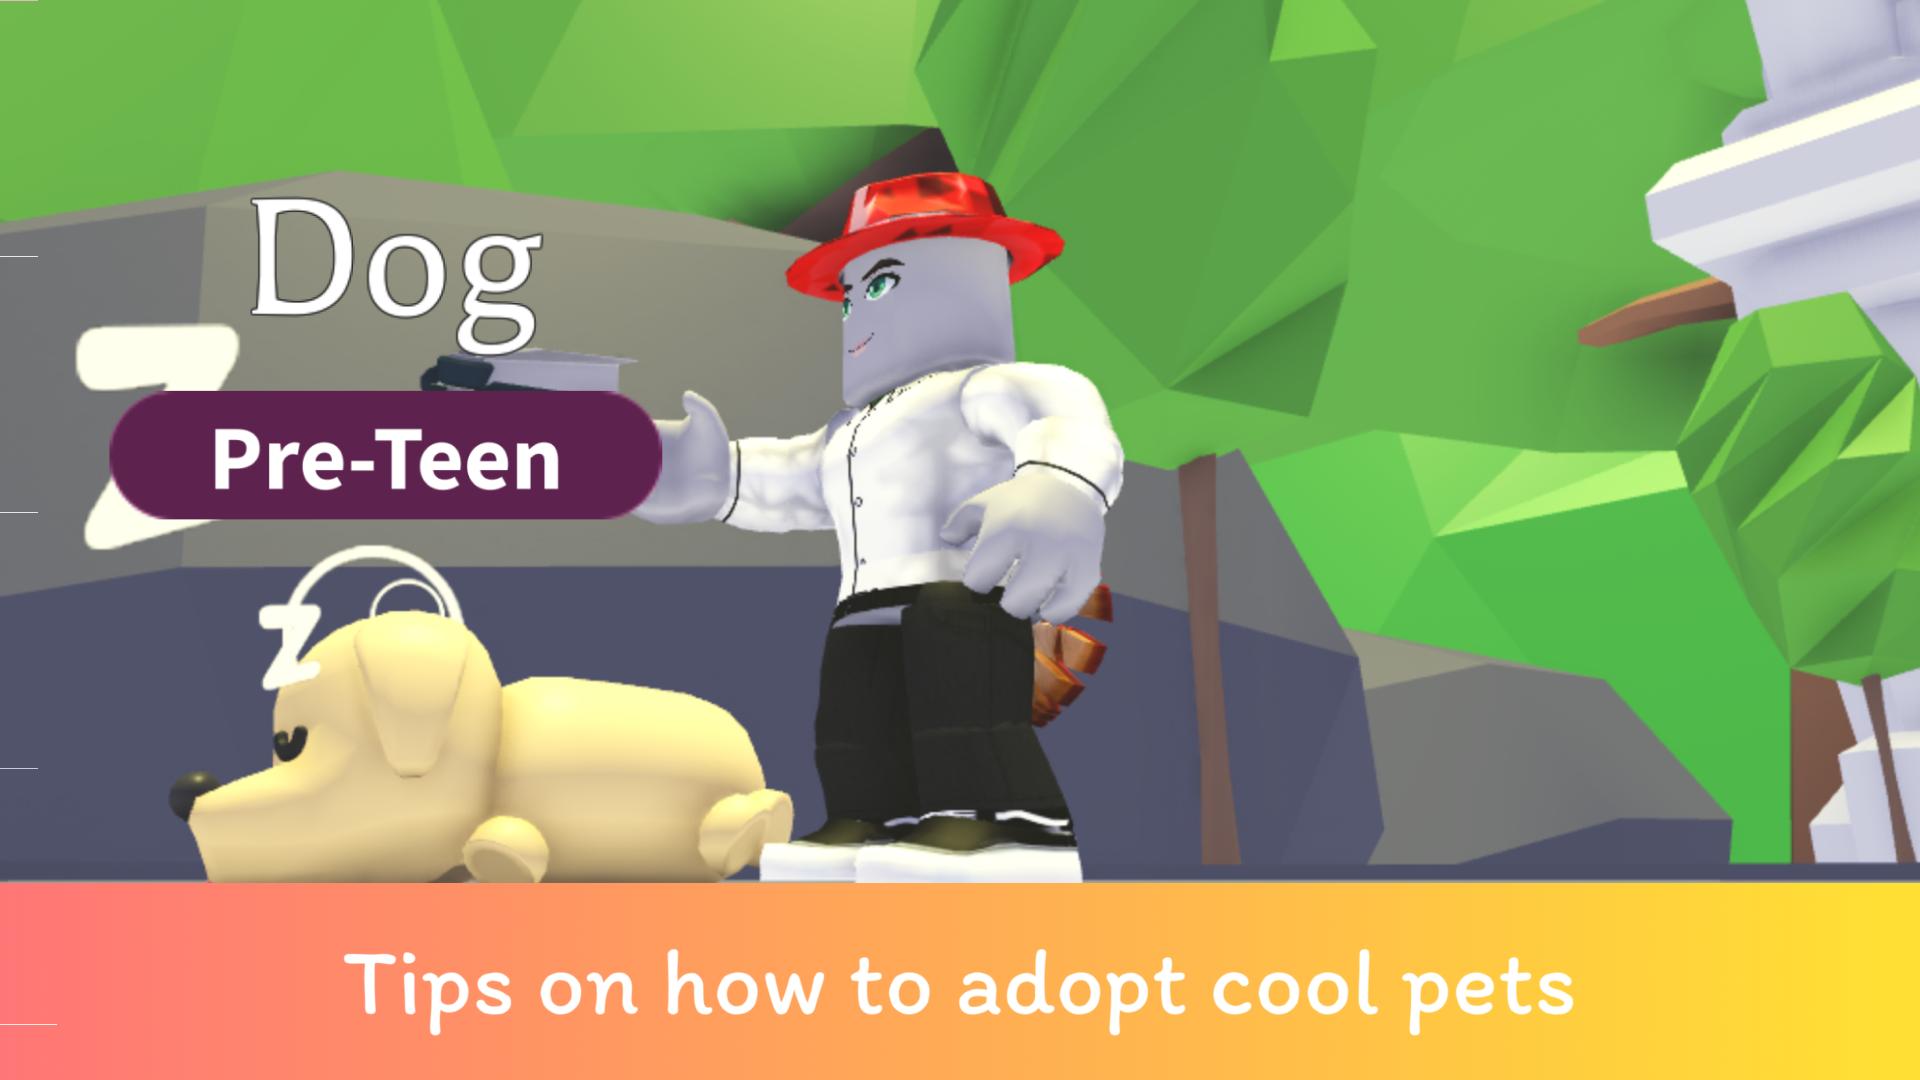 Download Mod Adopt Me: pets for roblox android on PC